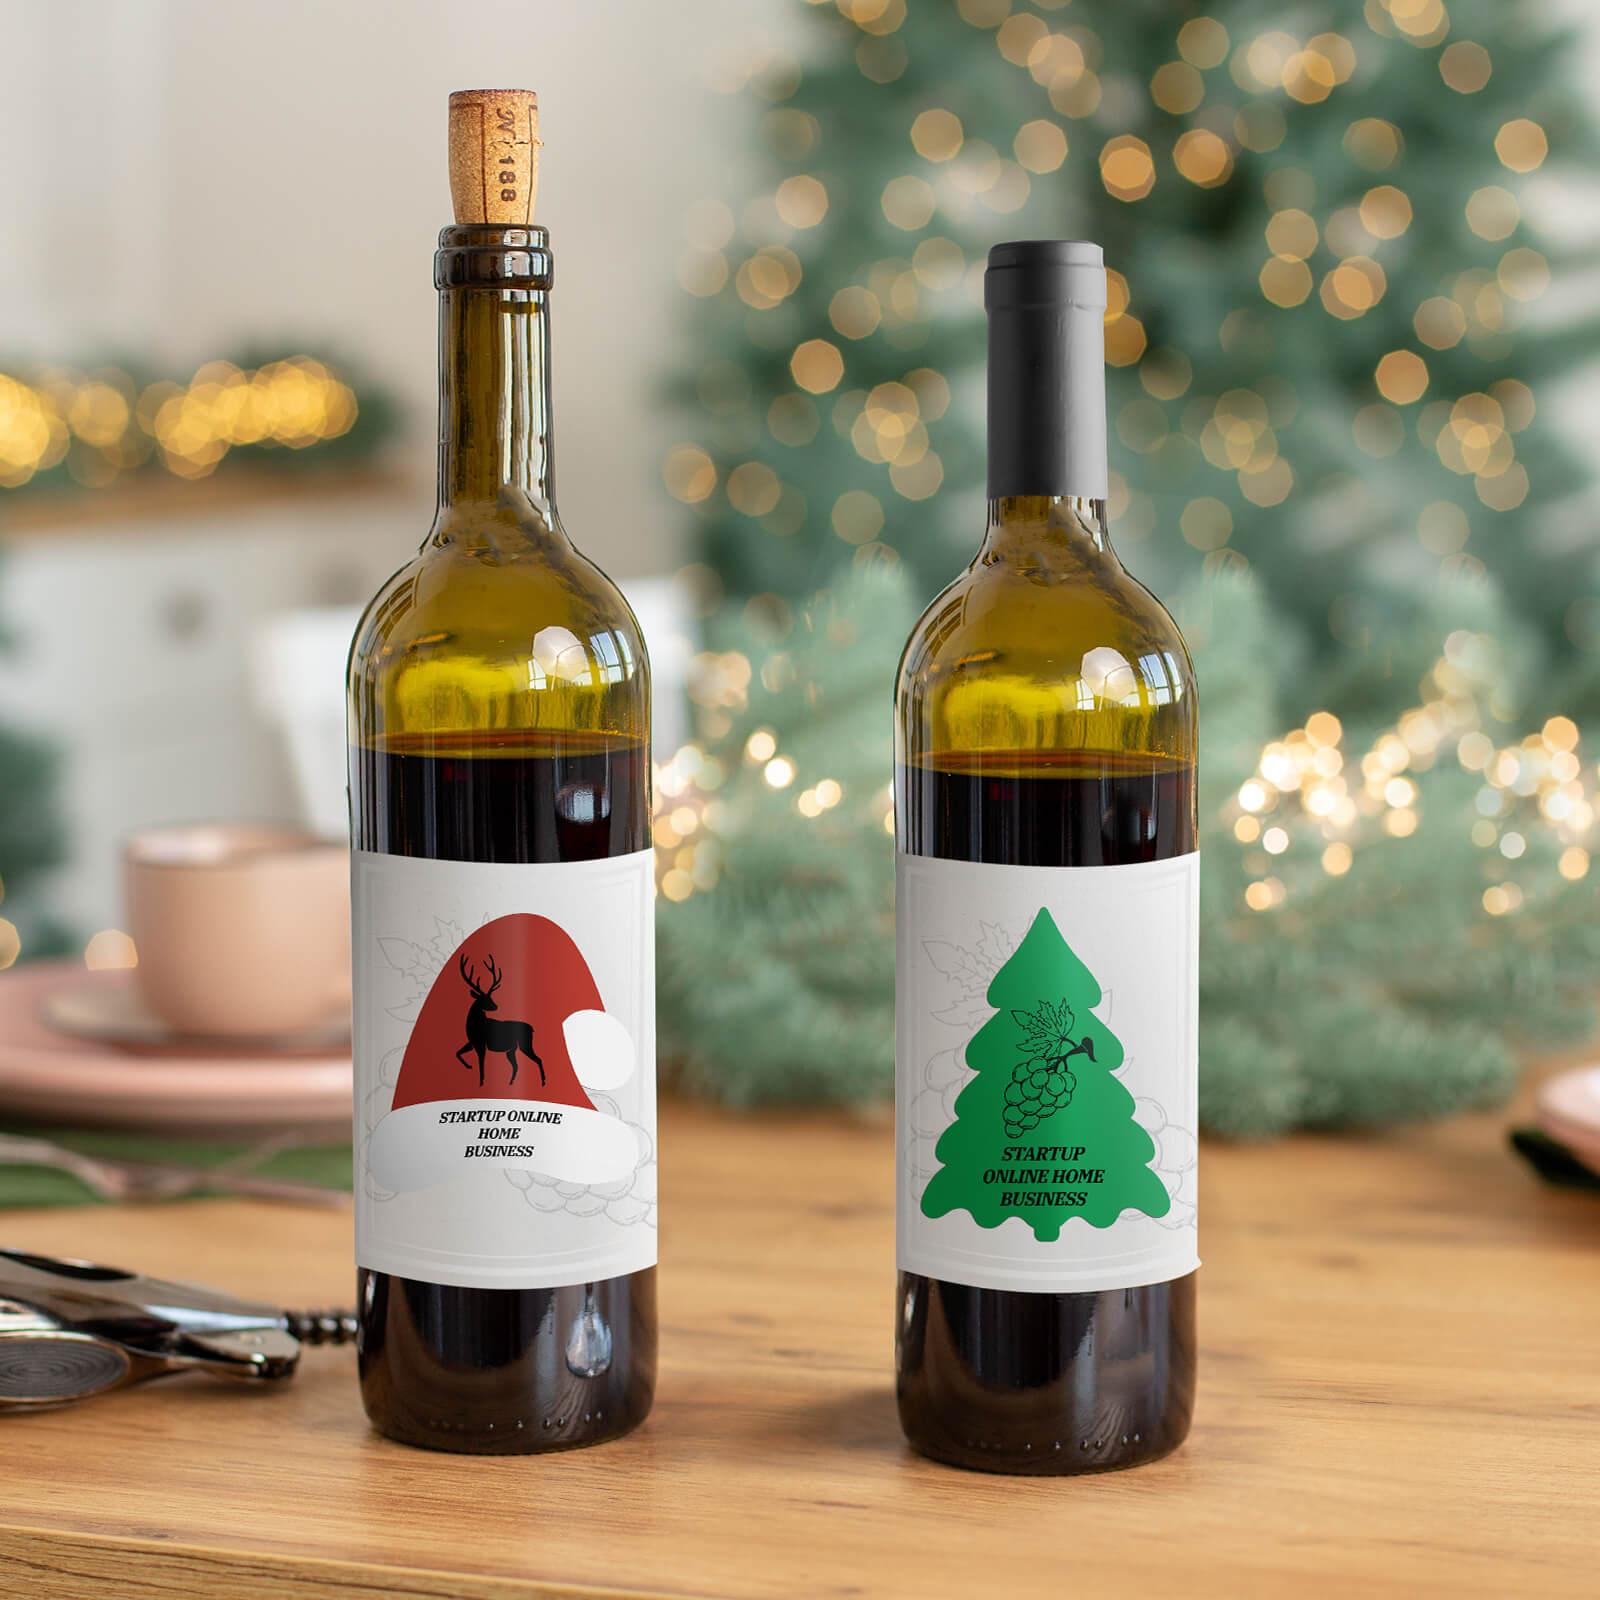 These direct thermal labels are shaped like pine trees, adding a festive and fun element to your labeling needs.